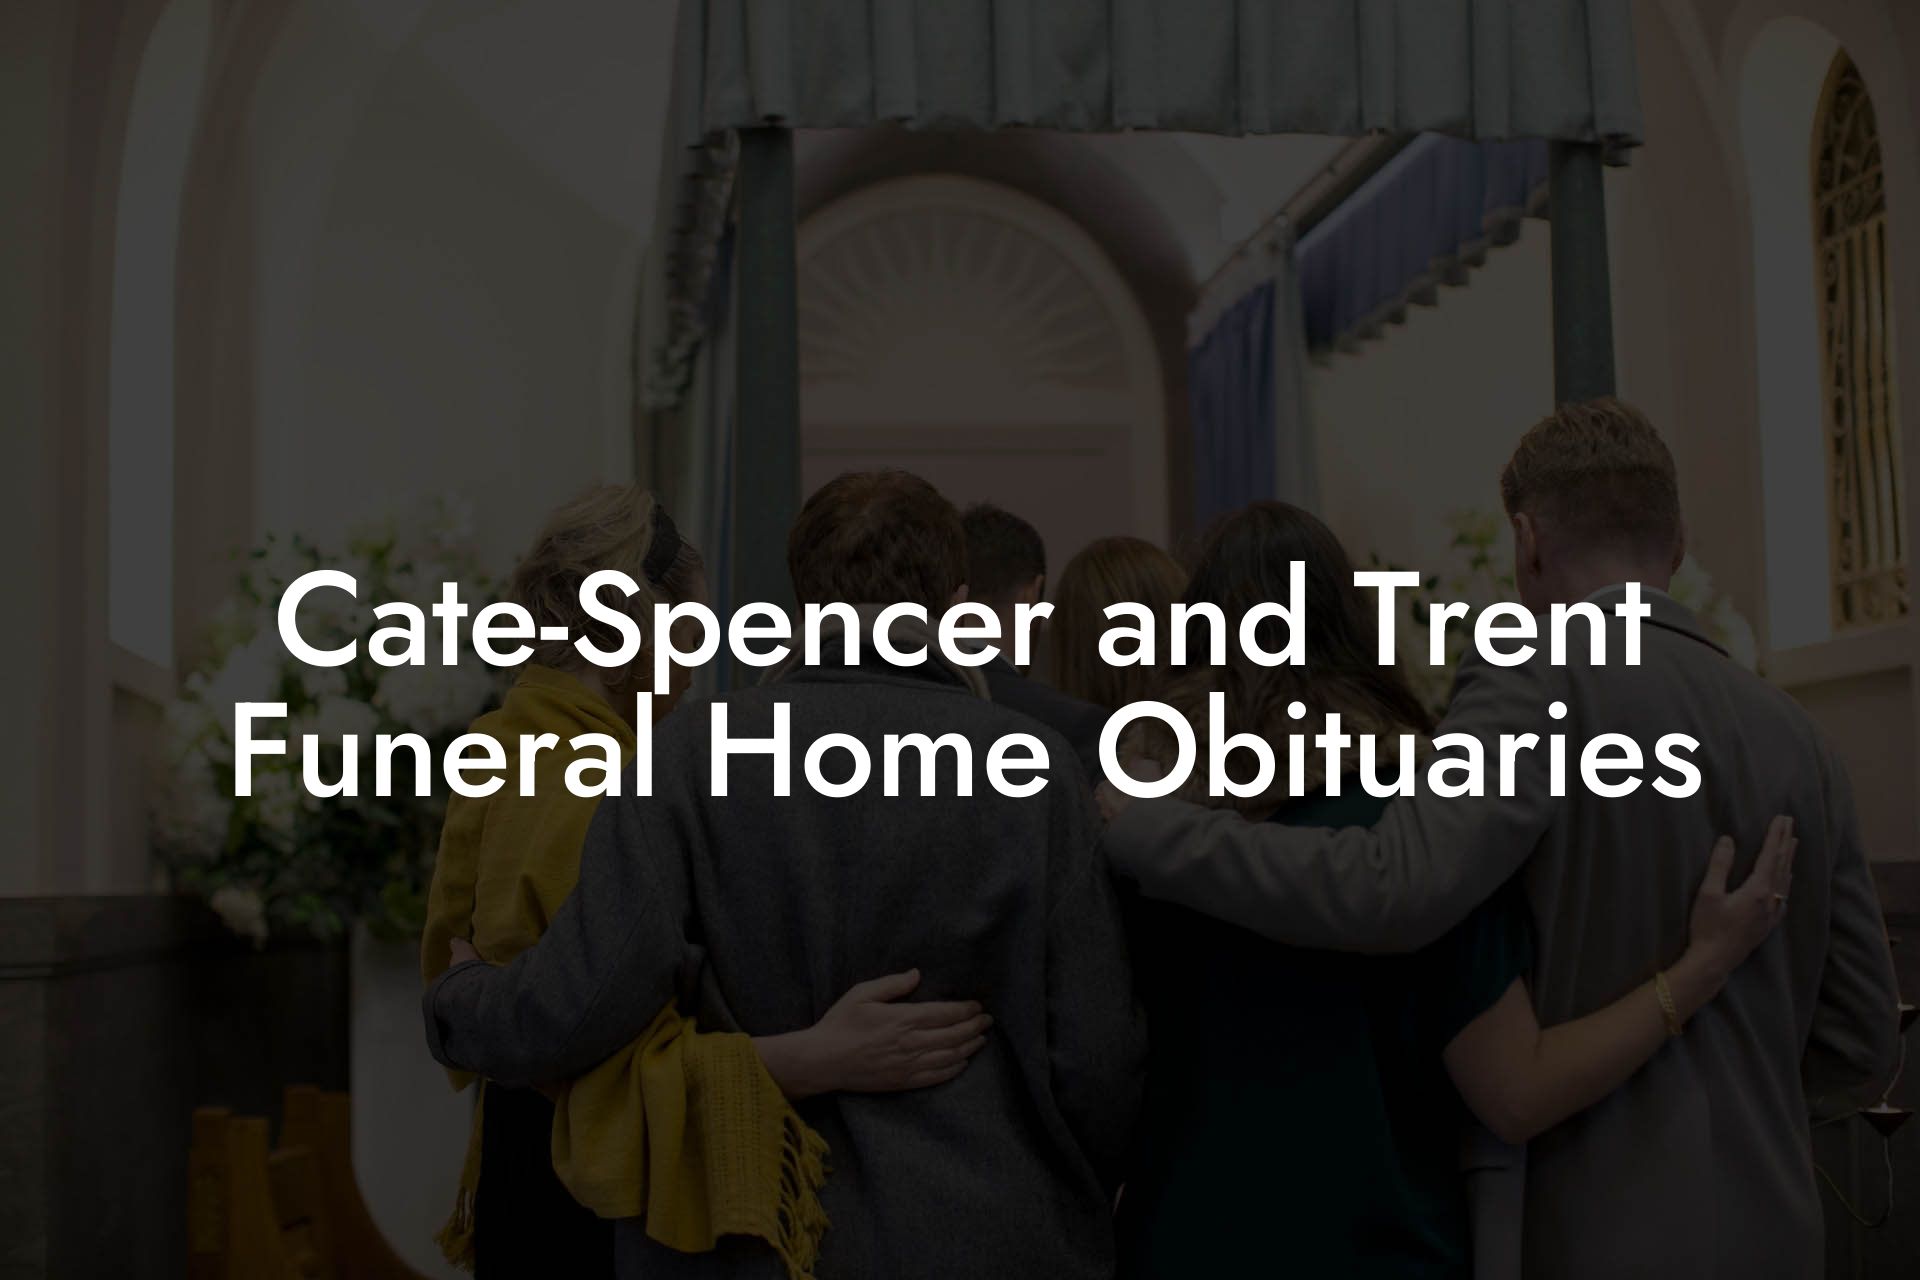 Cate-Spencer and Trent Funeral Home Obituaries